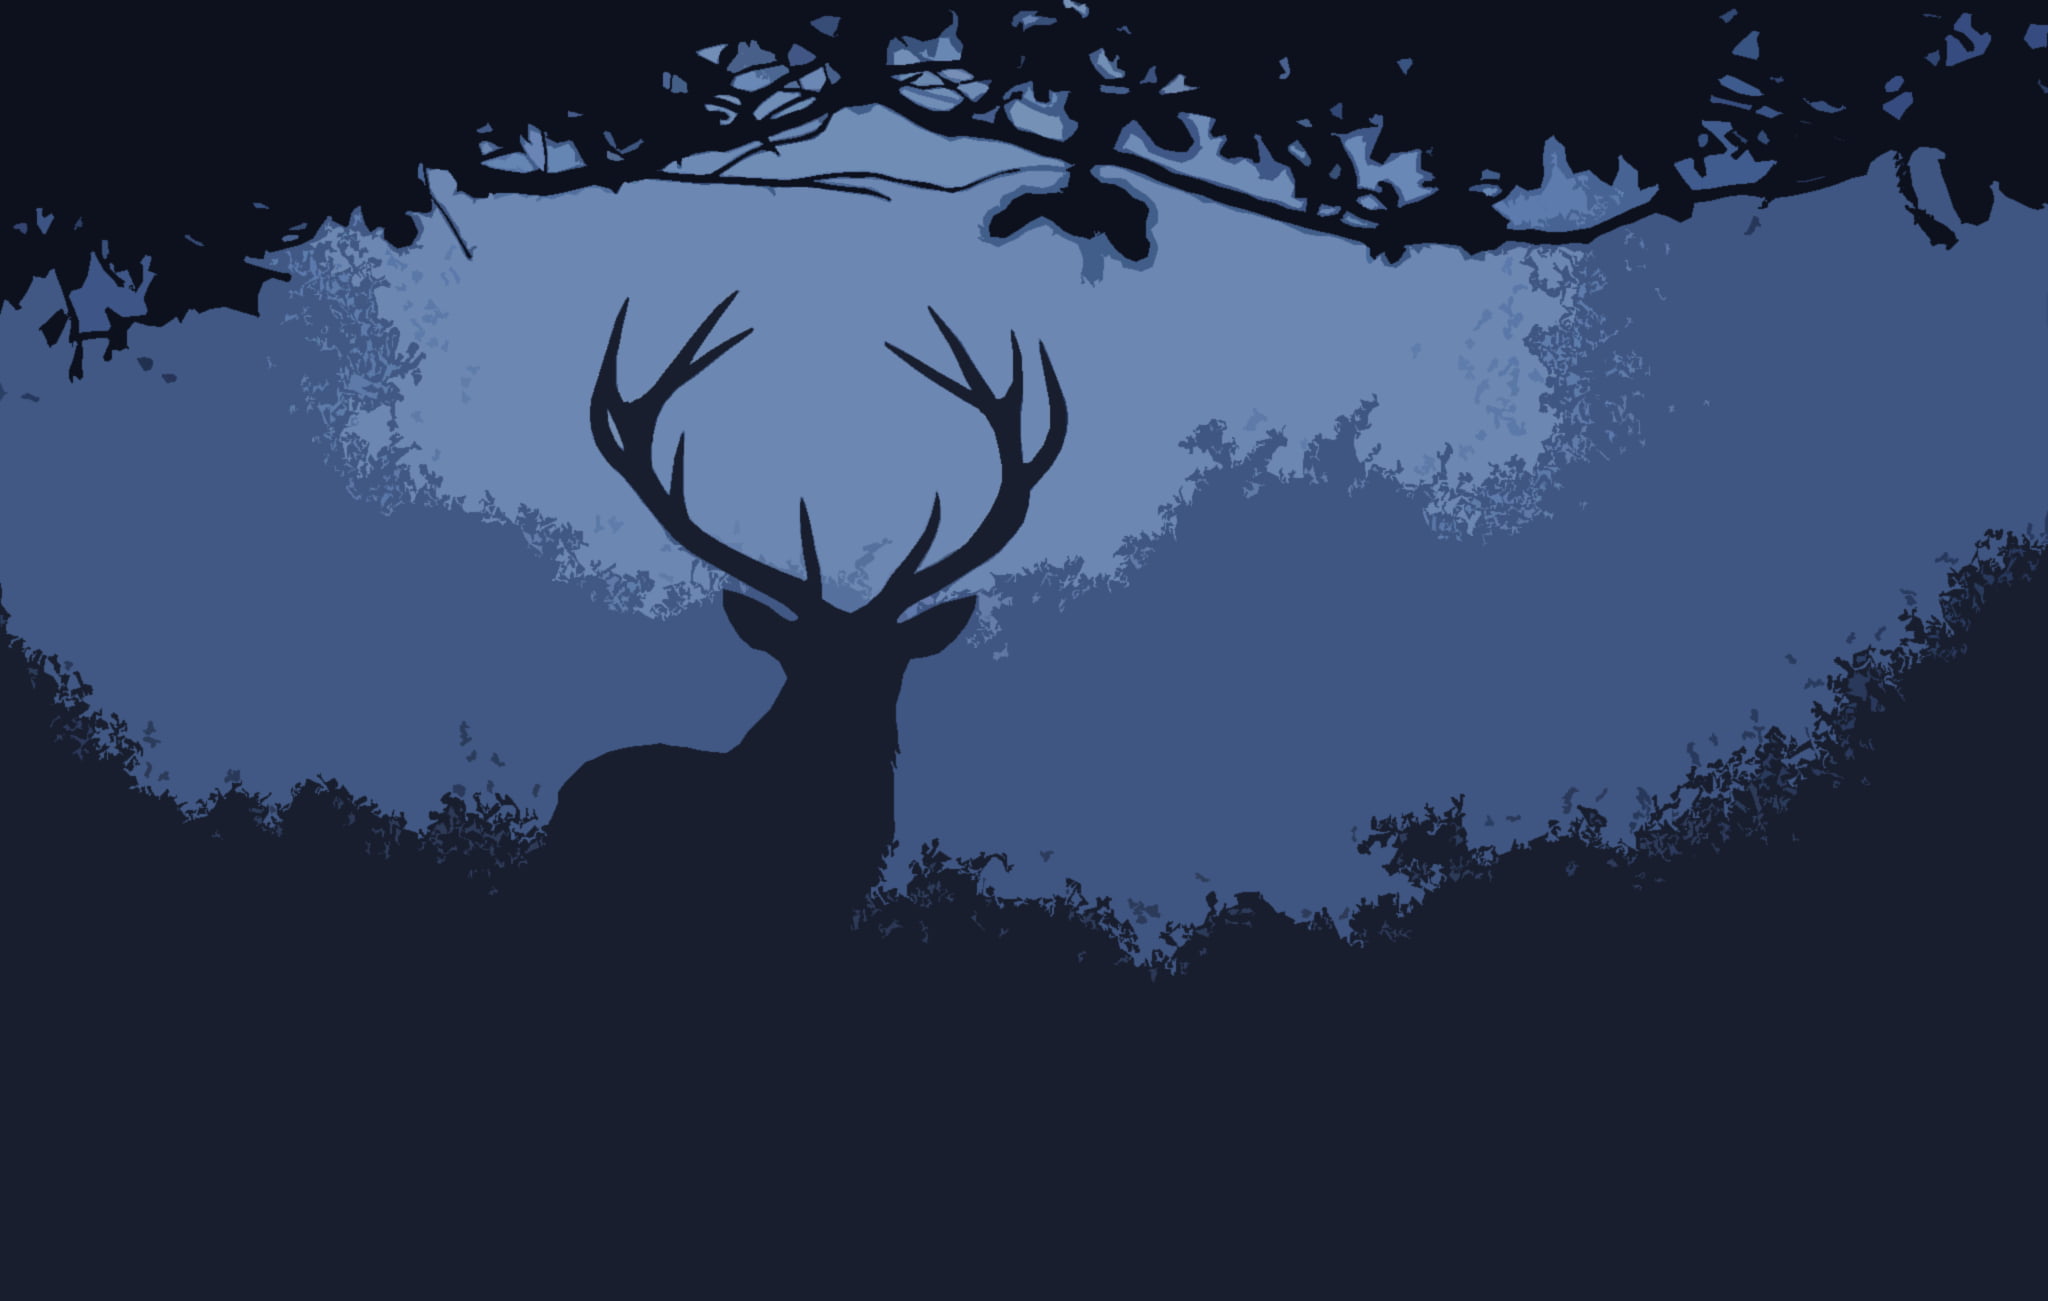 silhouette of deer illustration, silhouette of male deer on grass painting